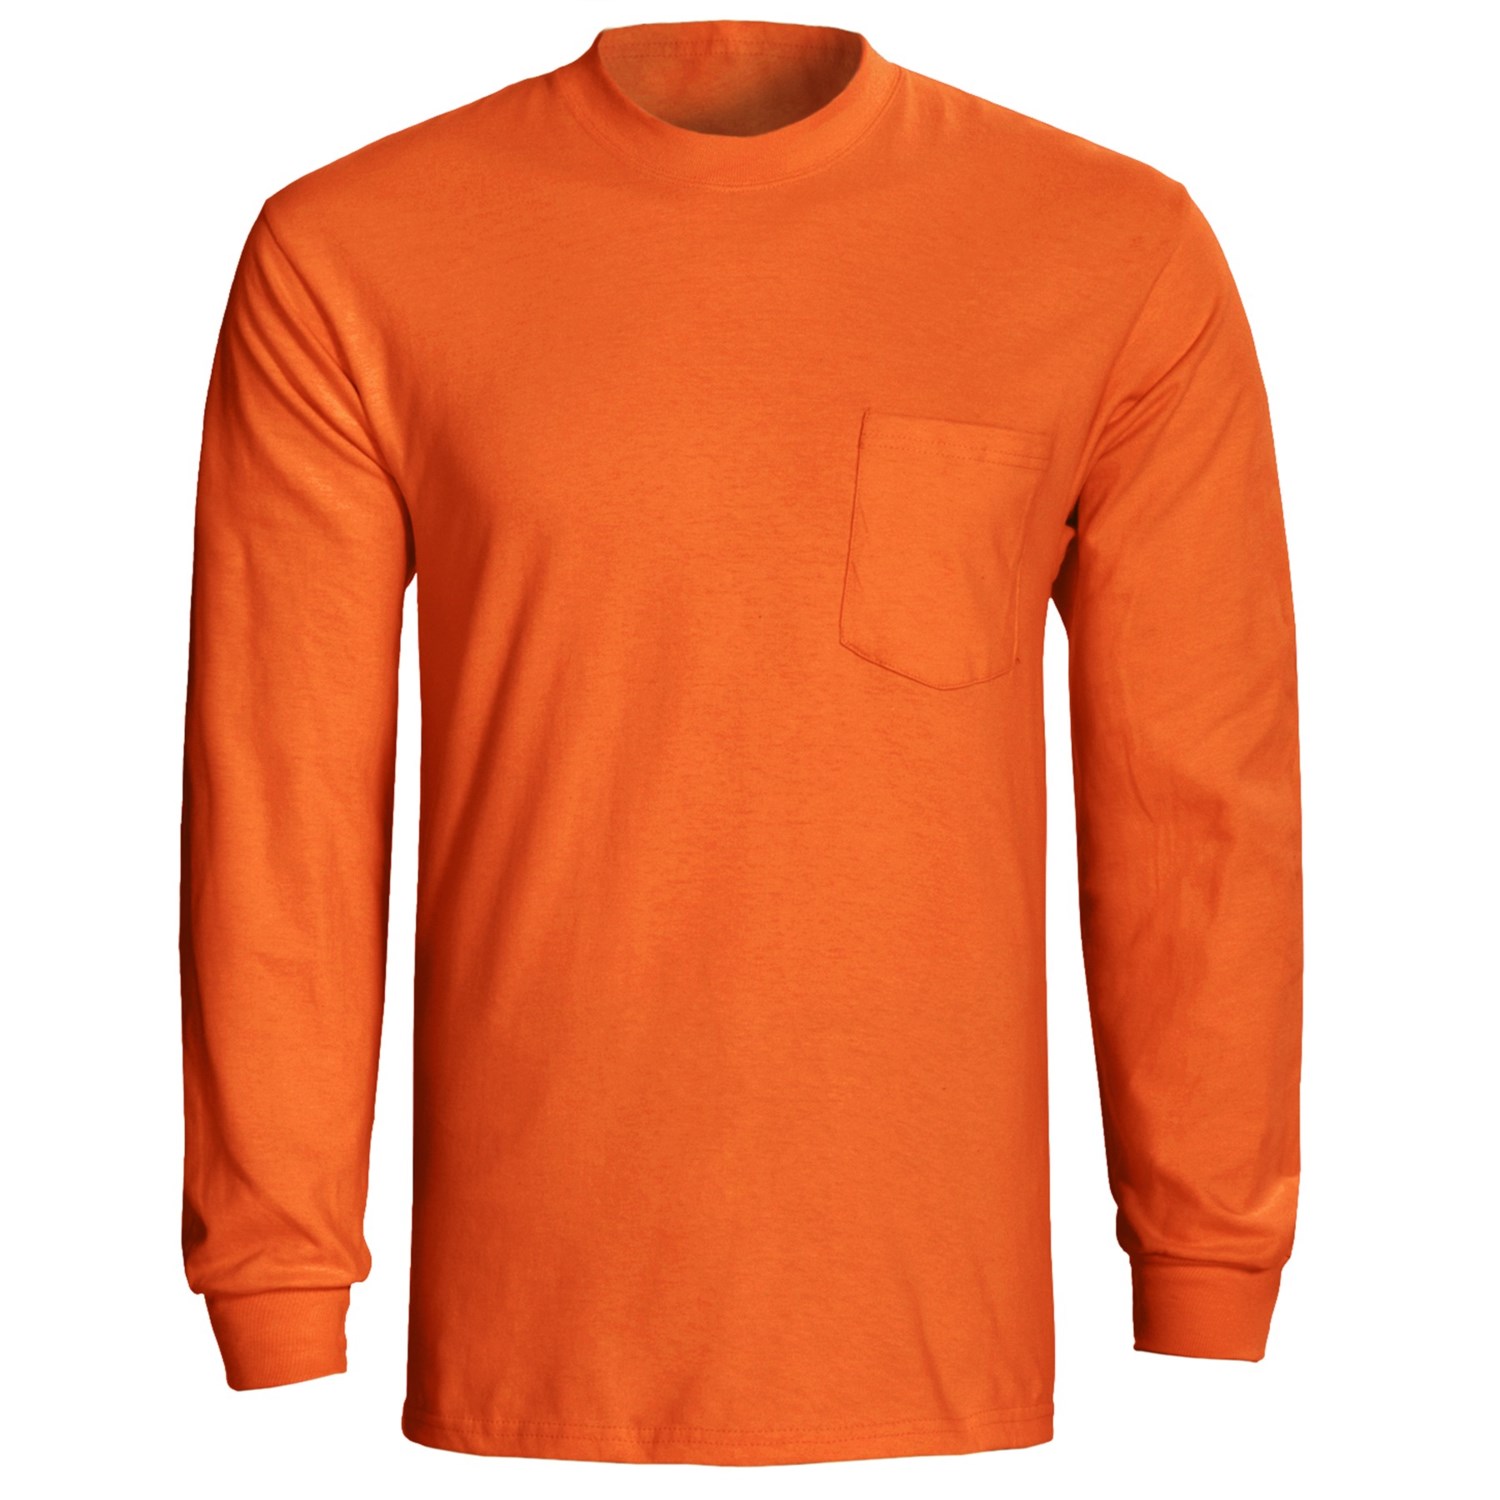 Hanes Tagless Pocket T-Shirt - Long Sleeve (For Men and Women) - Save 30%